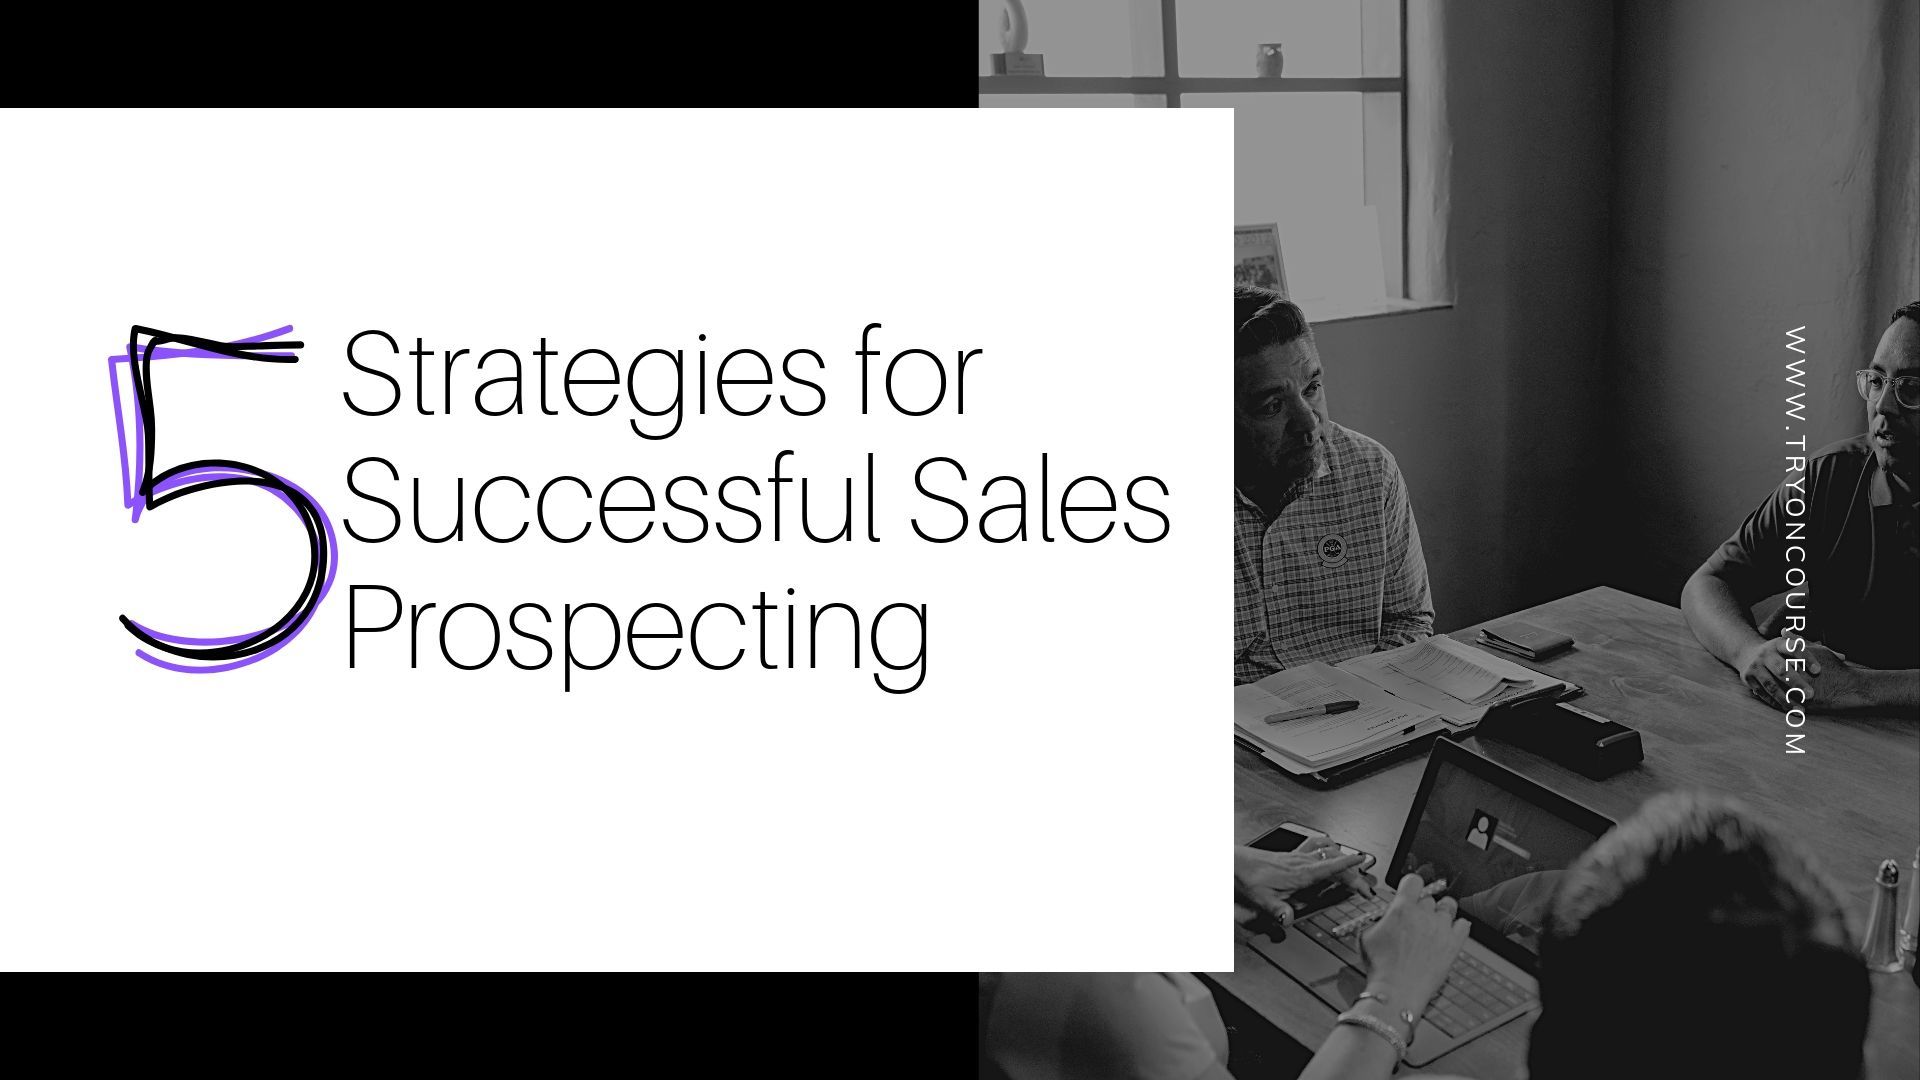 5 Strategies for Successful Sales Prospecting